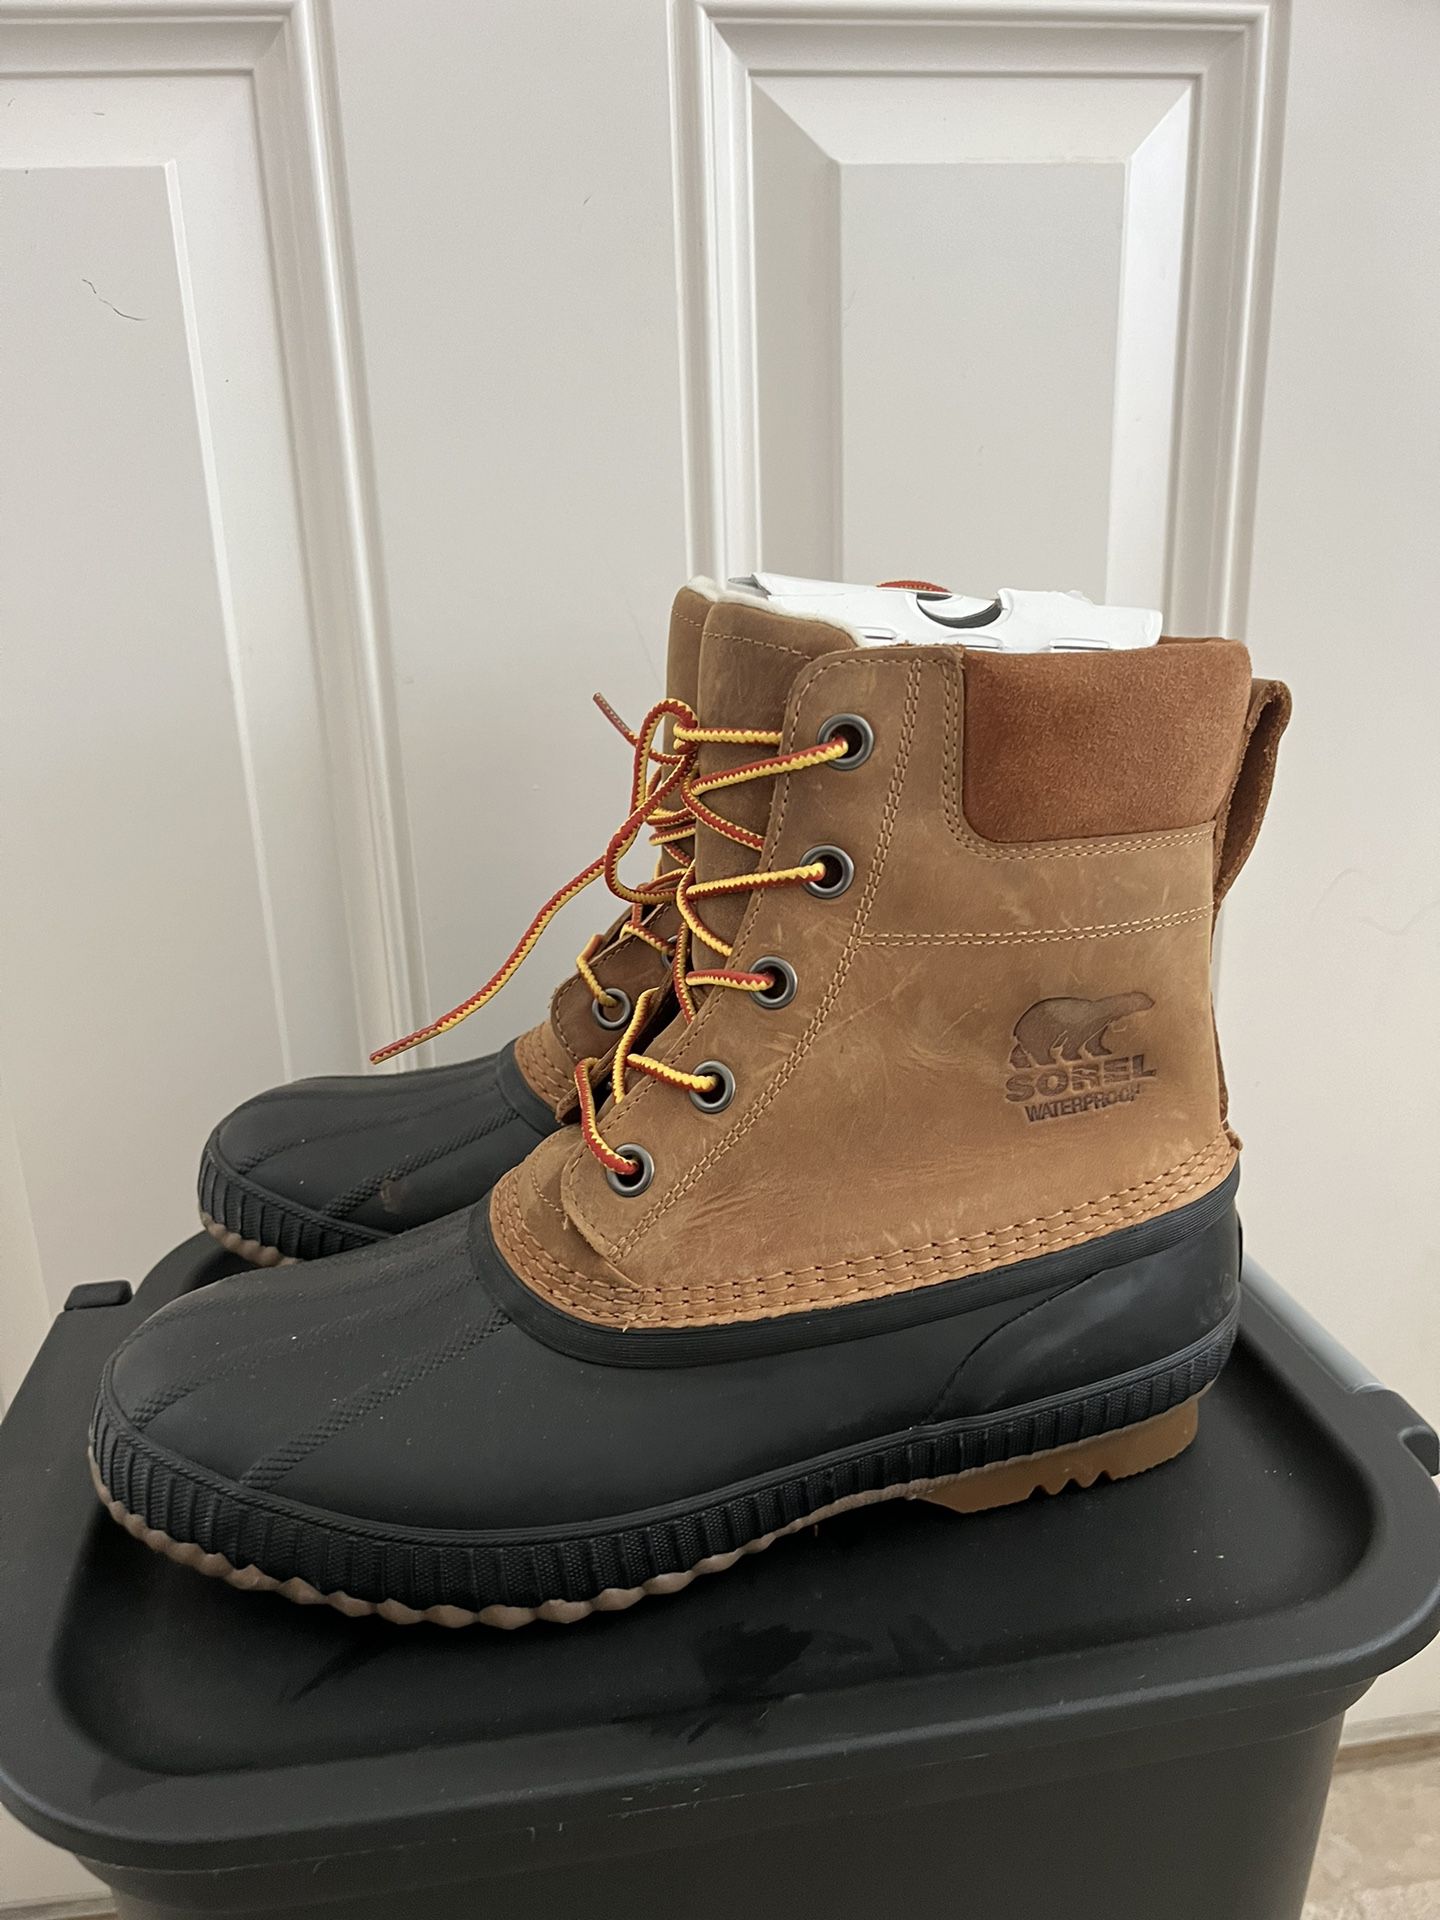 Sorel Duck Boots Size 11 New